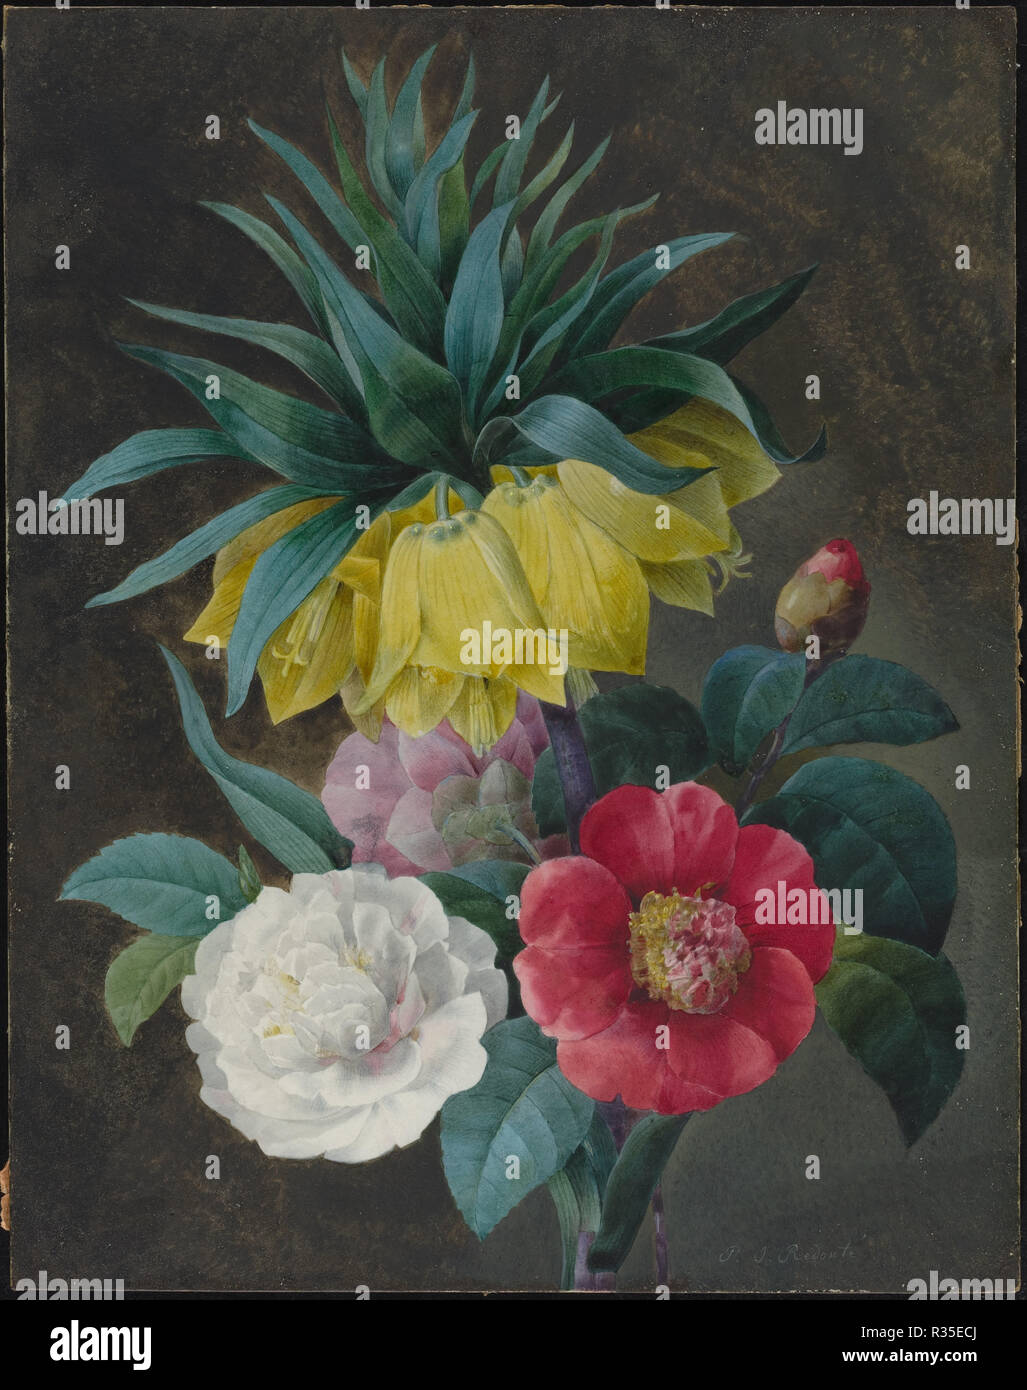 Four Peonies and a Crown Imperial. Dimensions: overall: 37.5 x 29.5 cm (14 3/4 x 11 5/8 in.). Medium: watercolor and gouache over graphite on parchment mounted on board. Museum: National Gallery of Art, Washington DC. Author: Pierre Joseph Redoute. Stock Photo